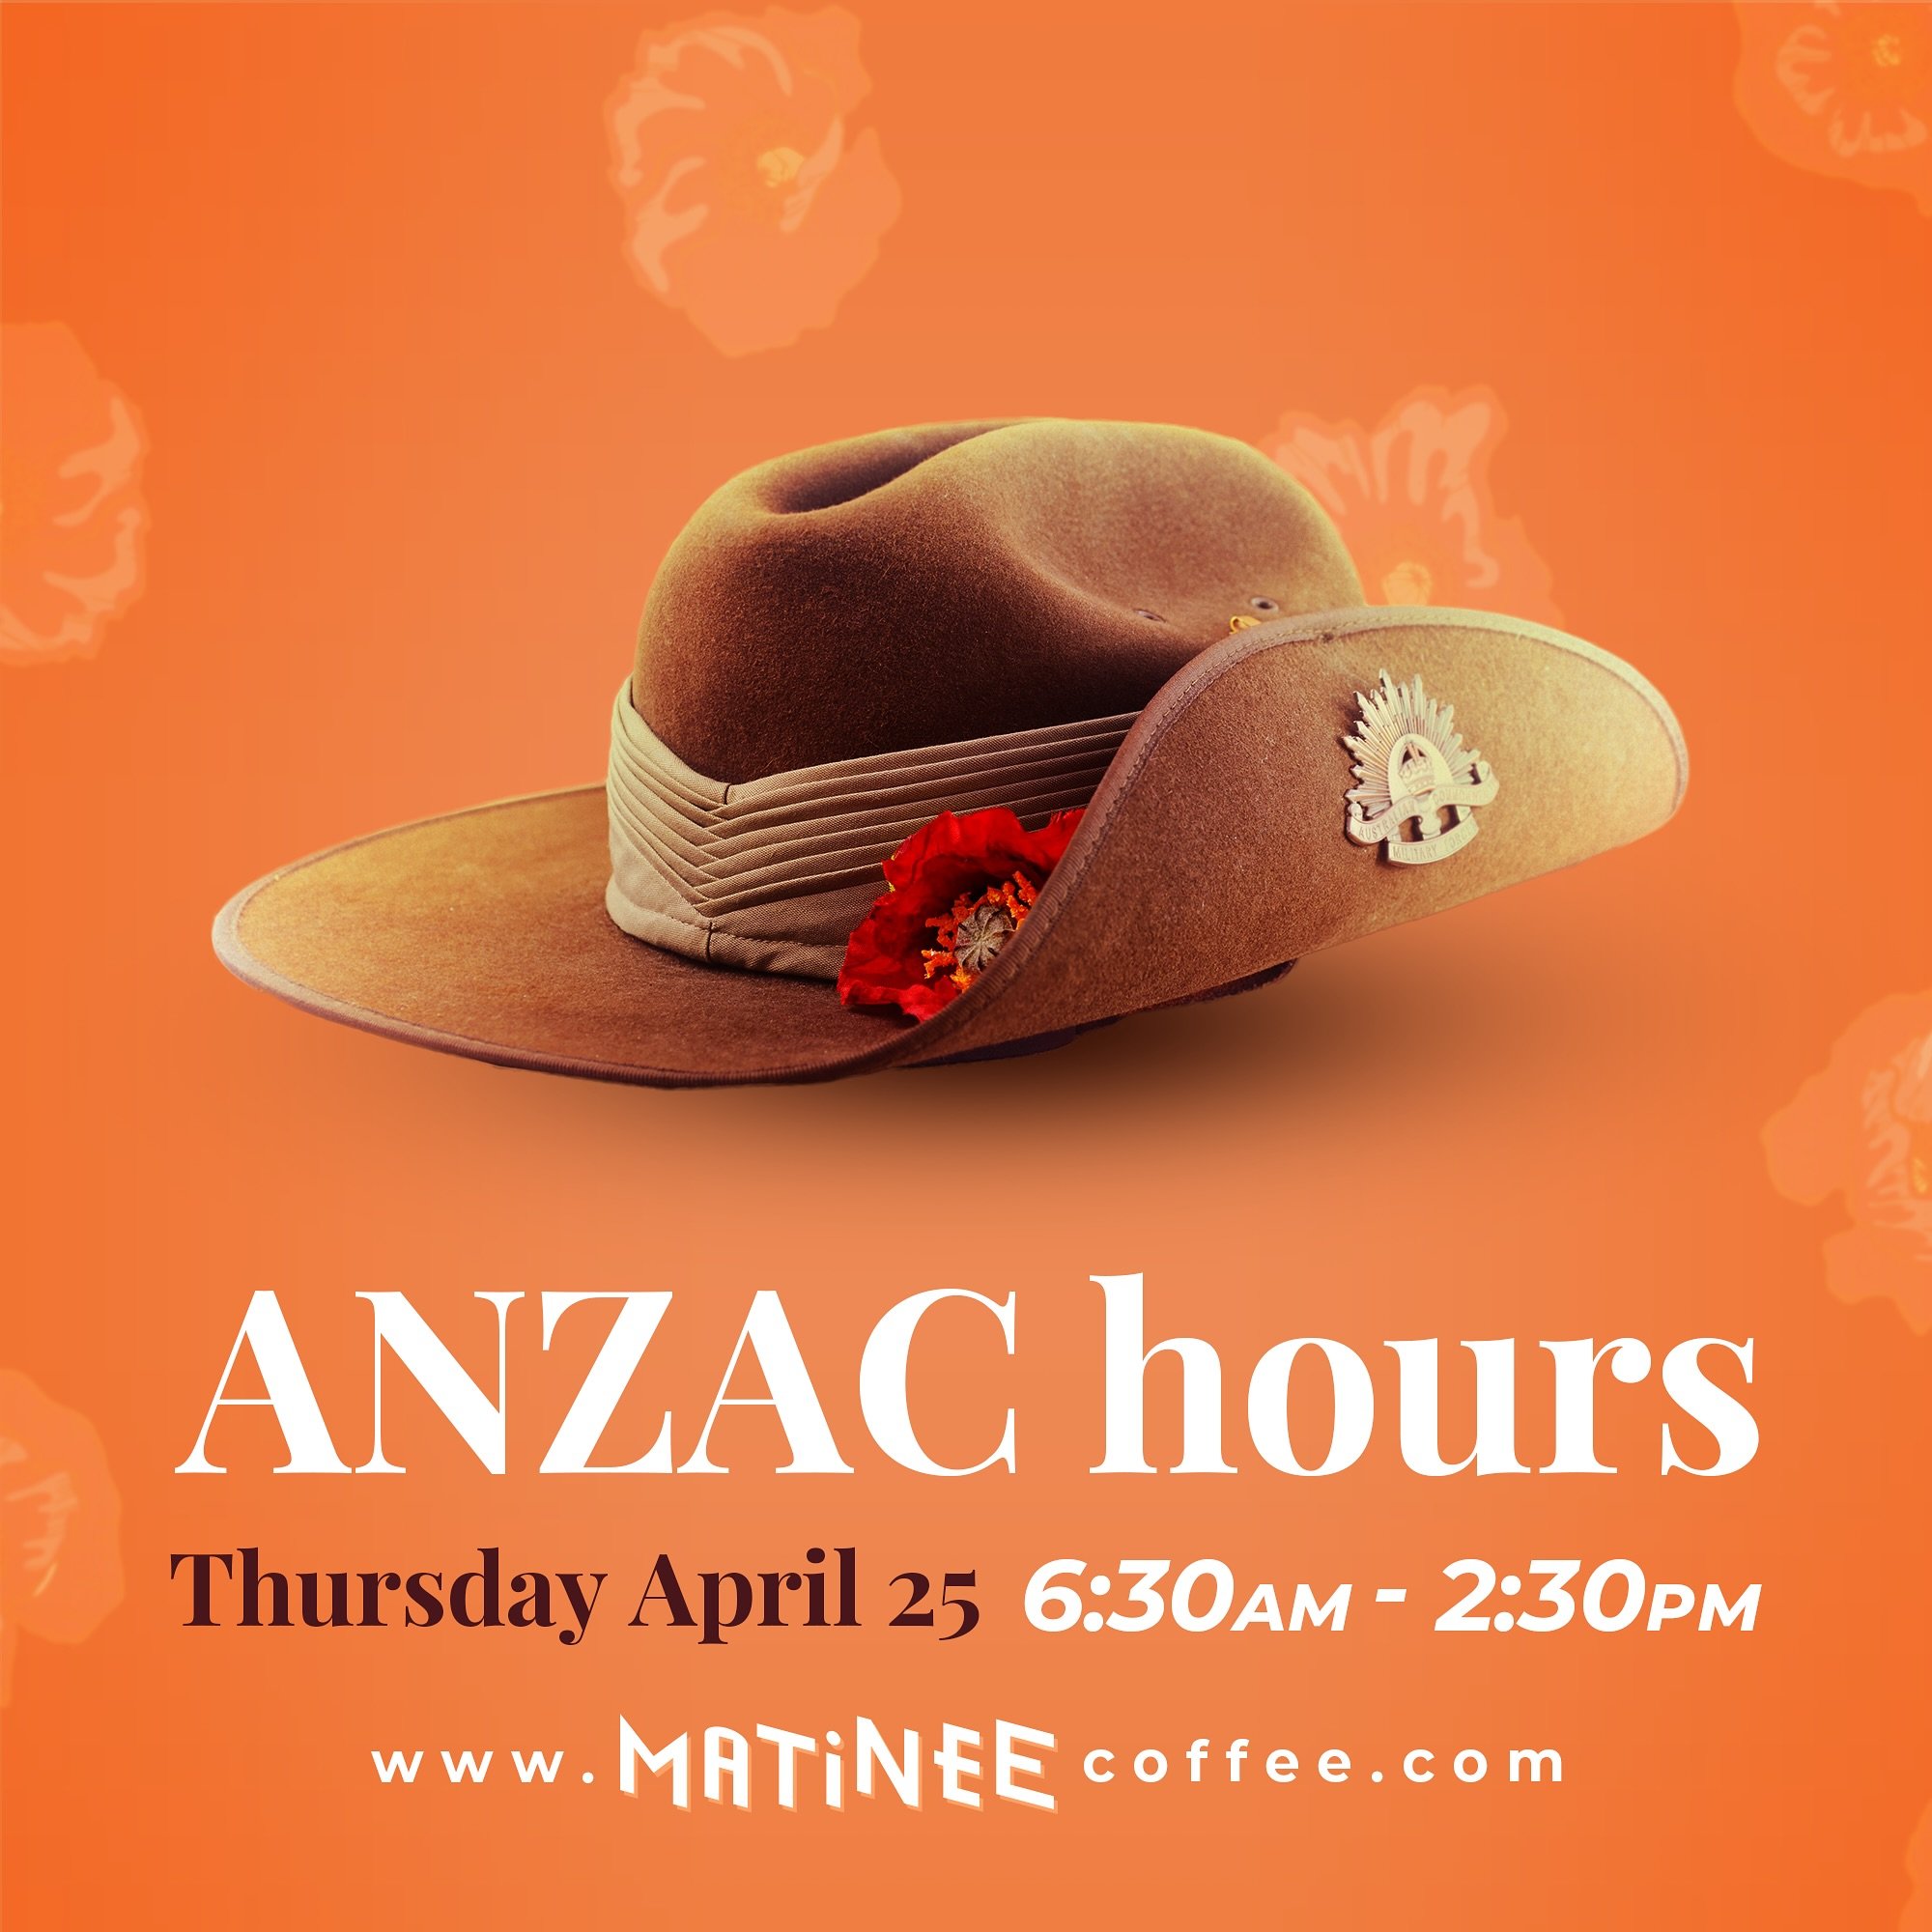 Hello, yes we will be open on Anzac Day #matineecoffee